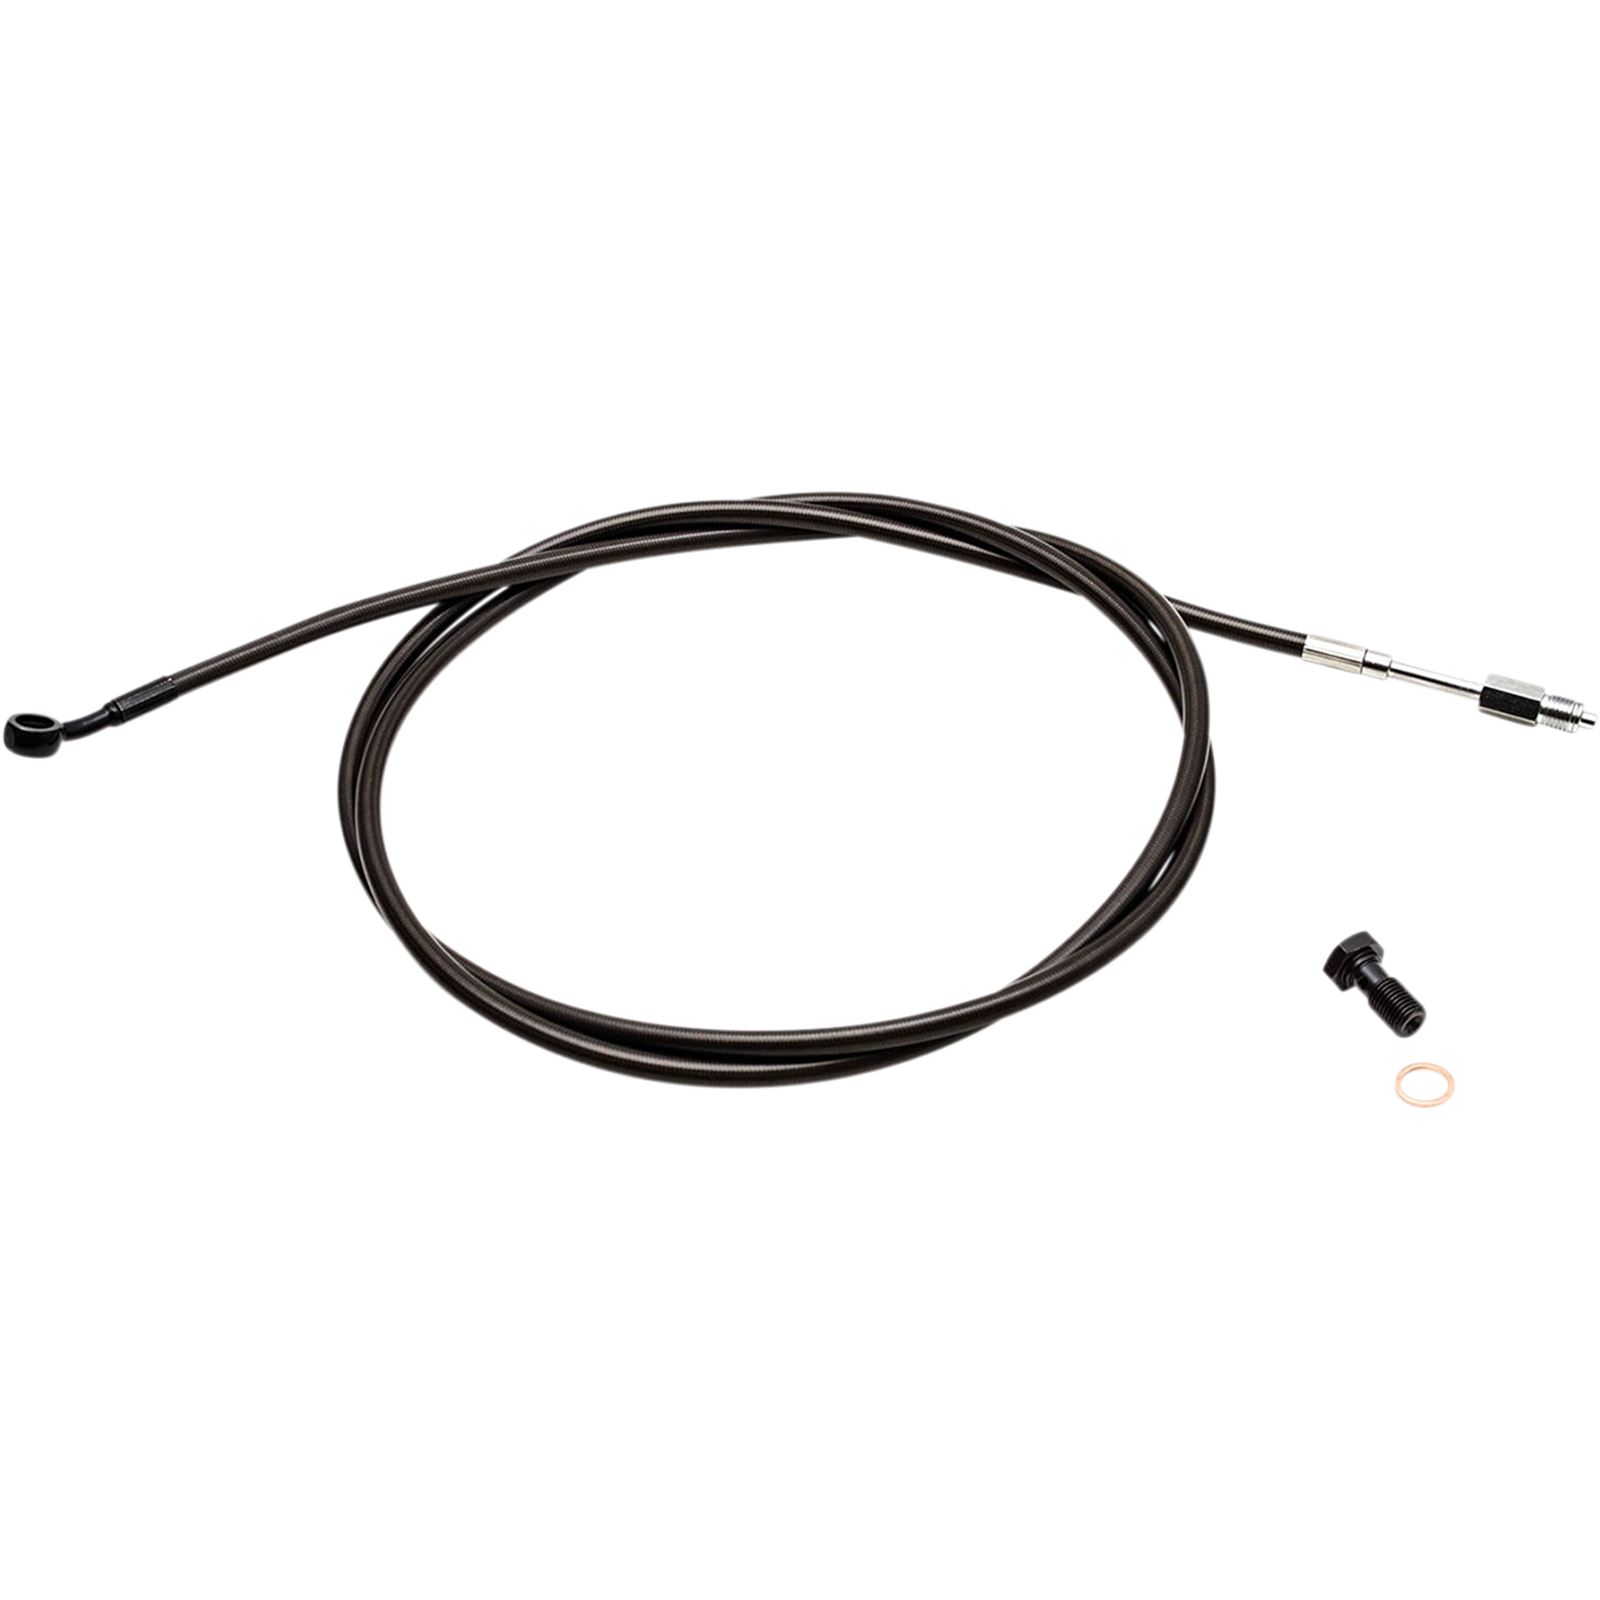 LA Choppers Clutch Cable - Midnight - 15"-17"